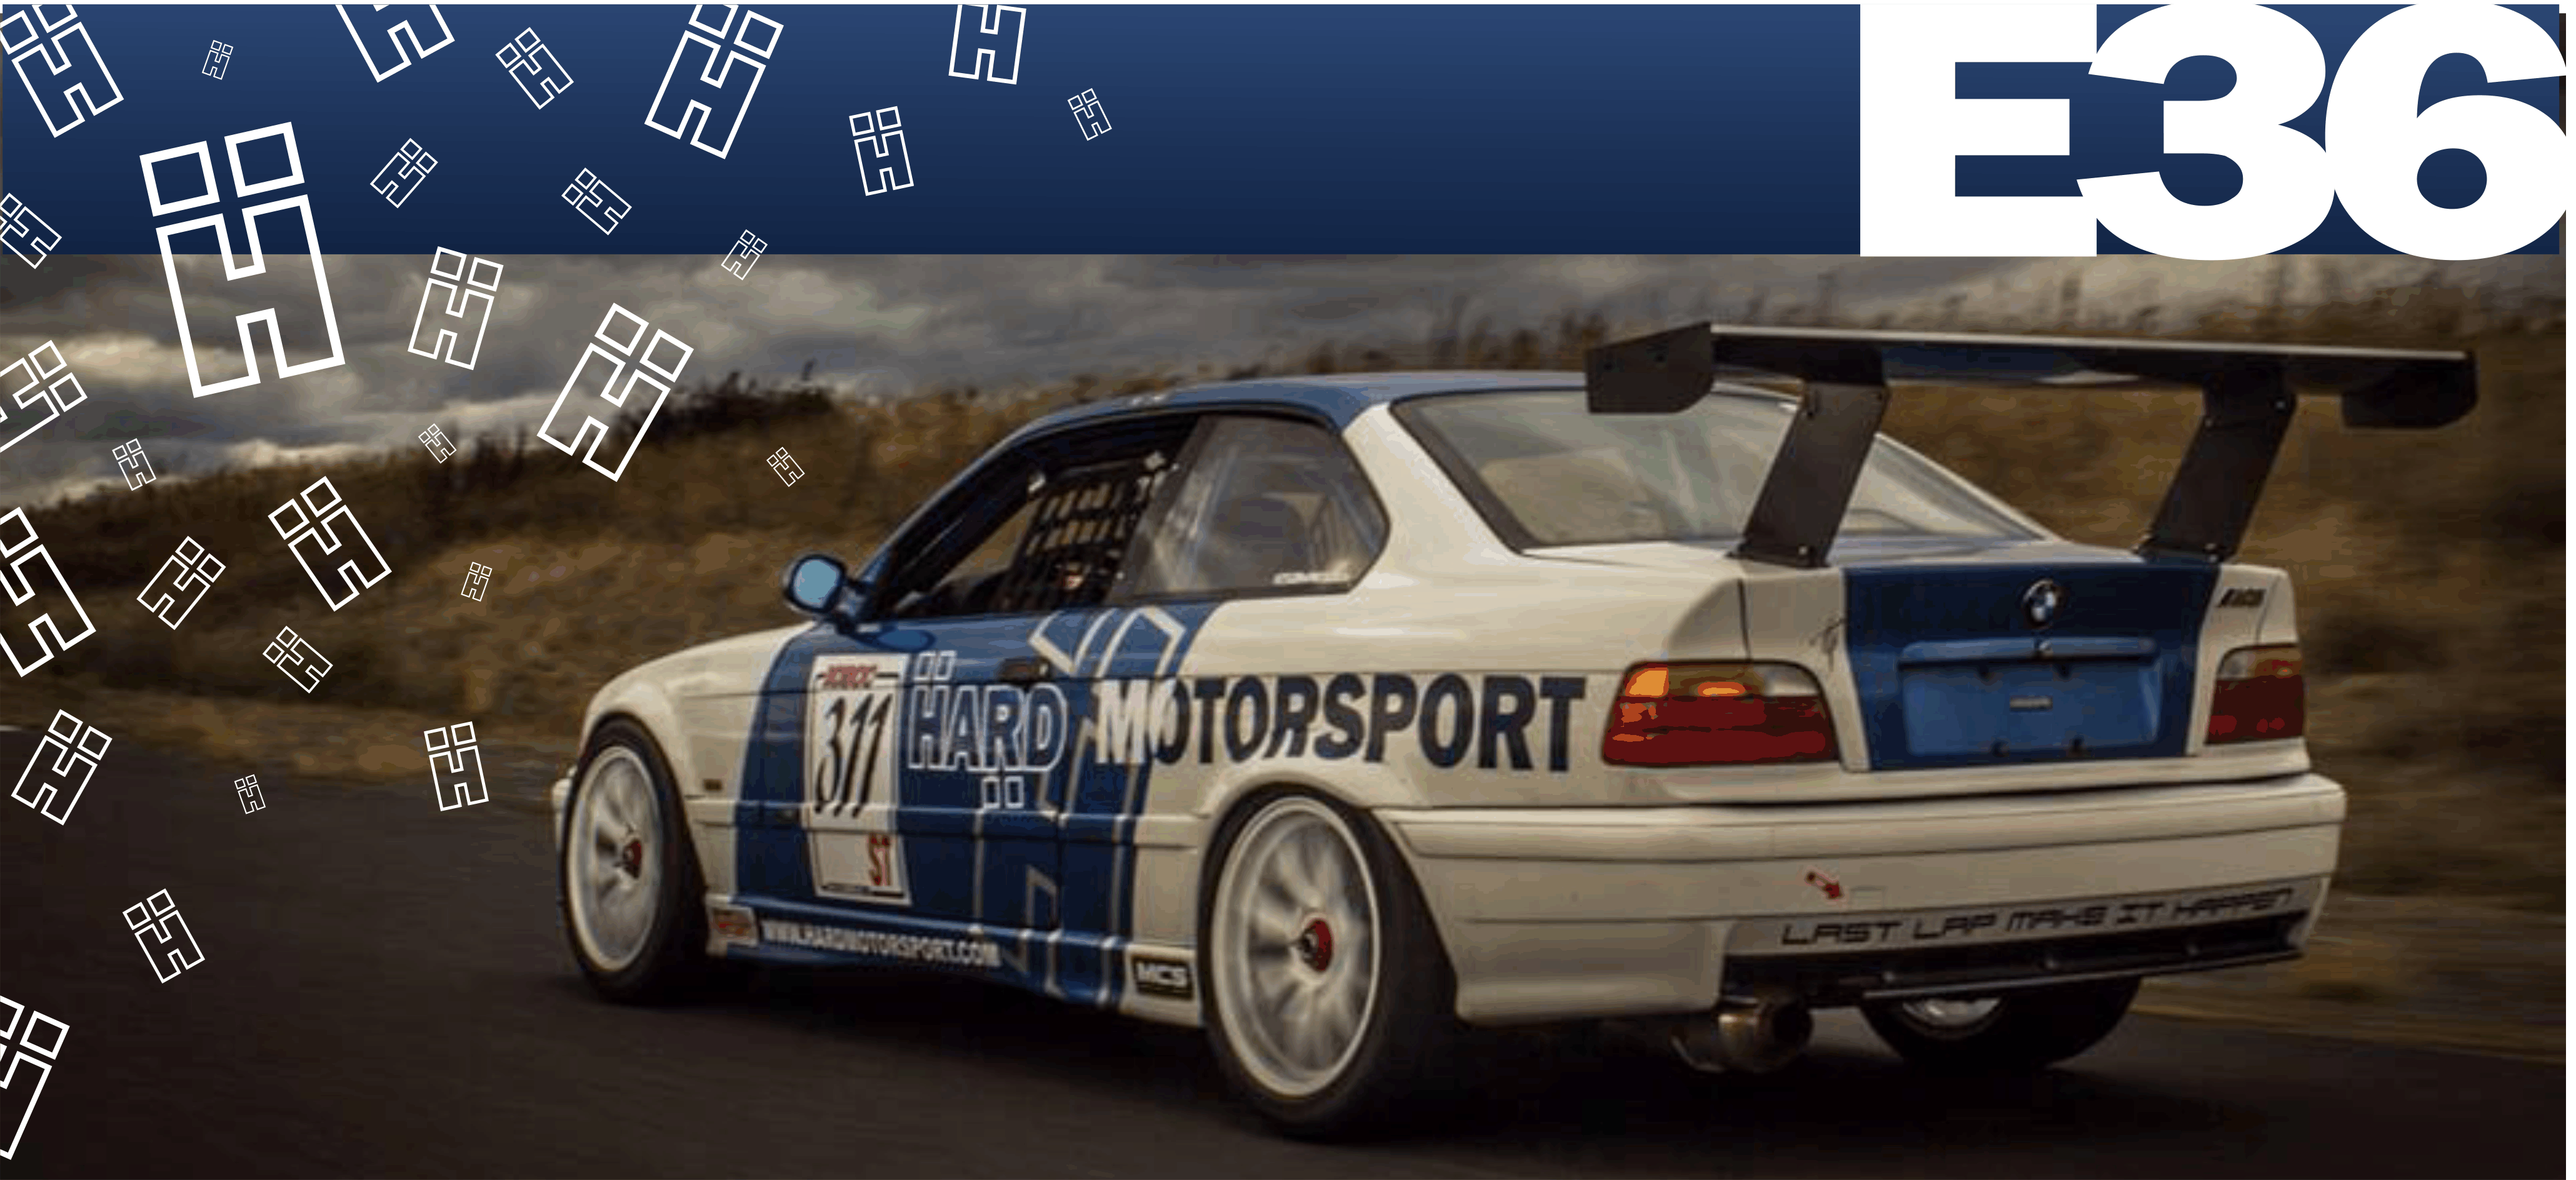 BMW E36 Racing race car becauseracecar track parts fender flares